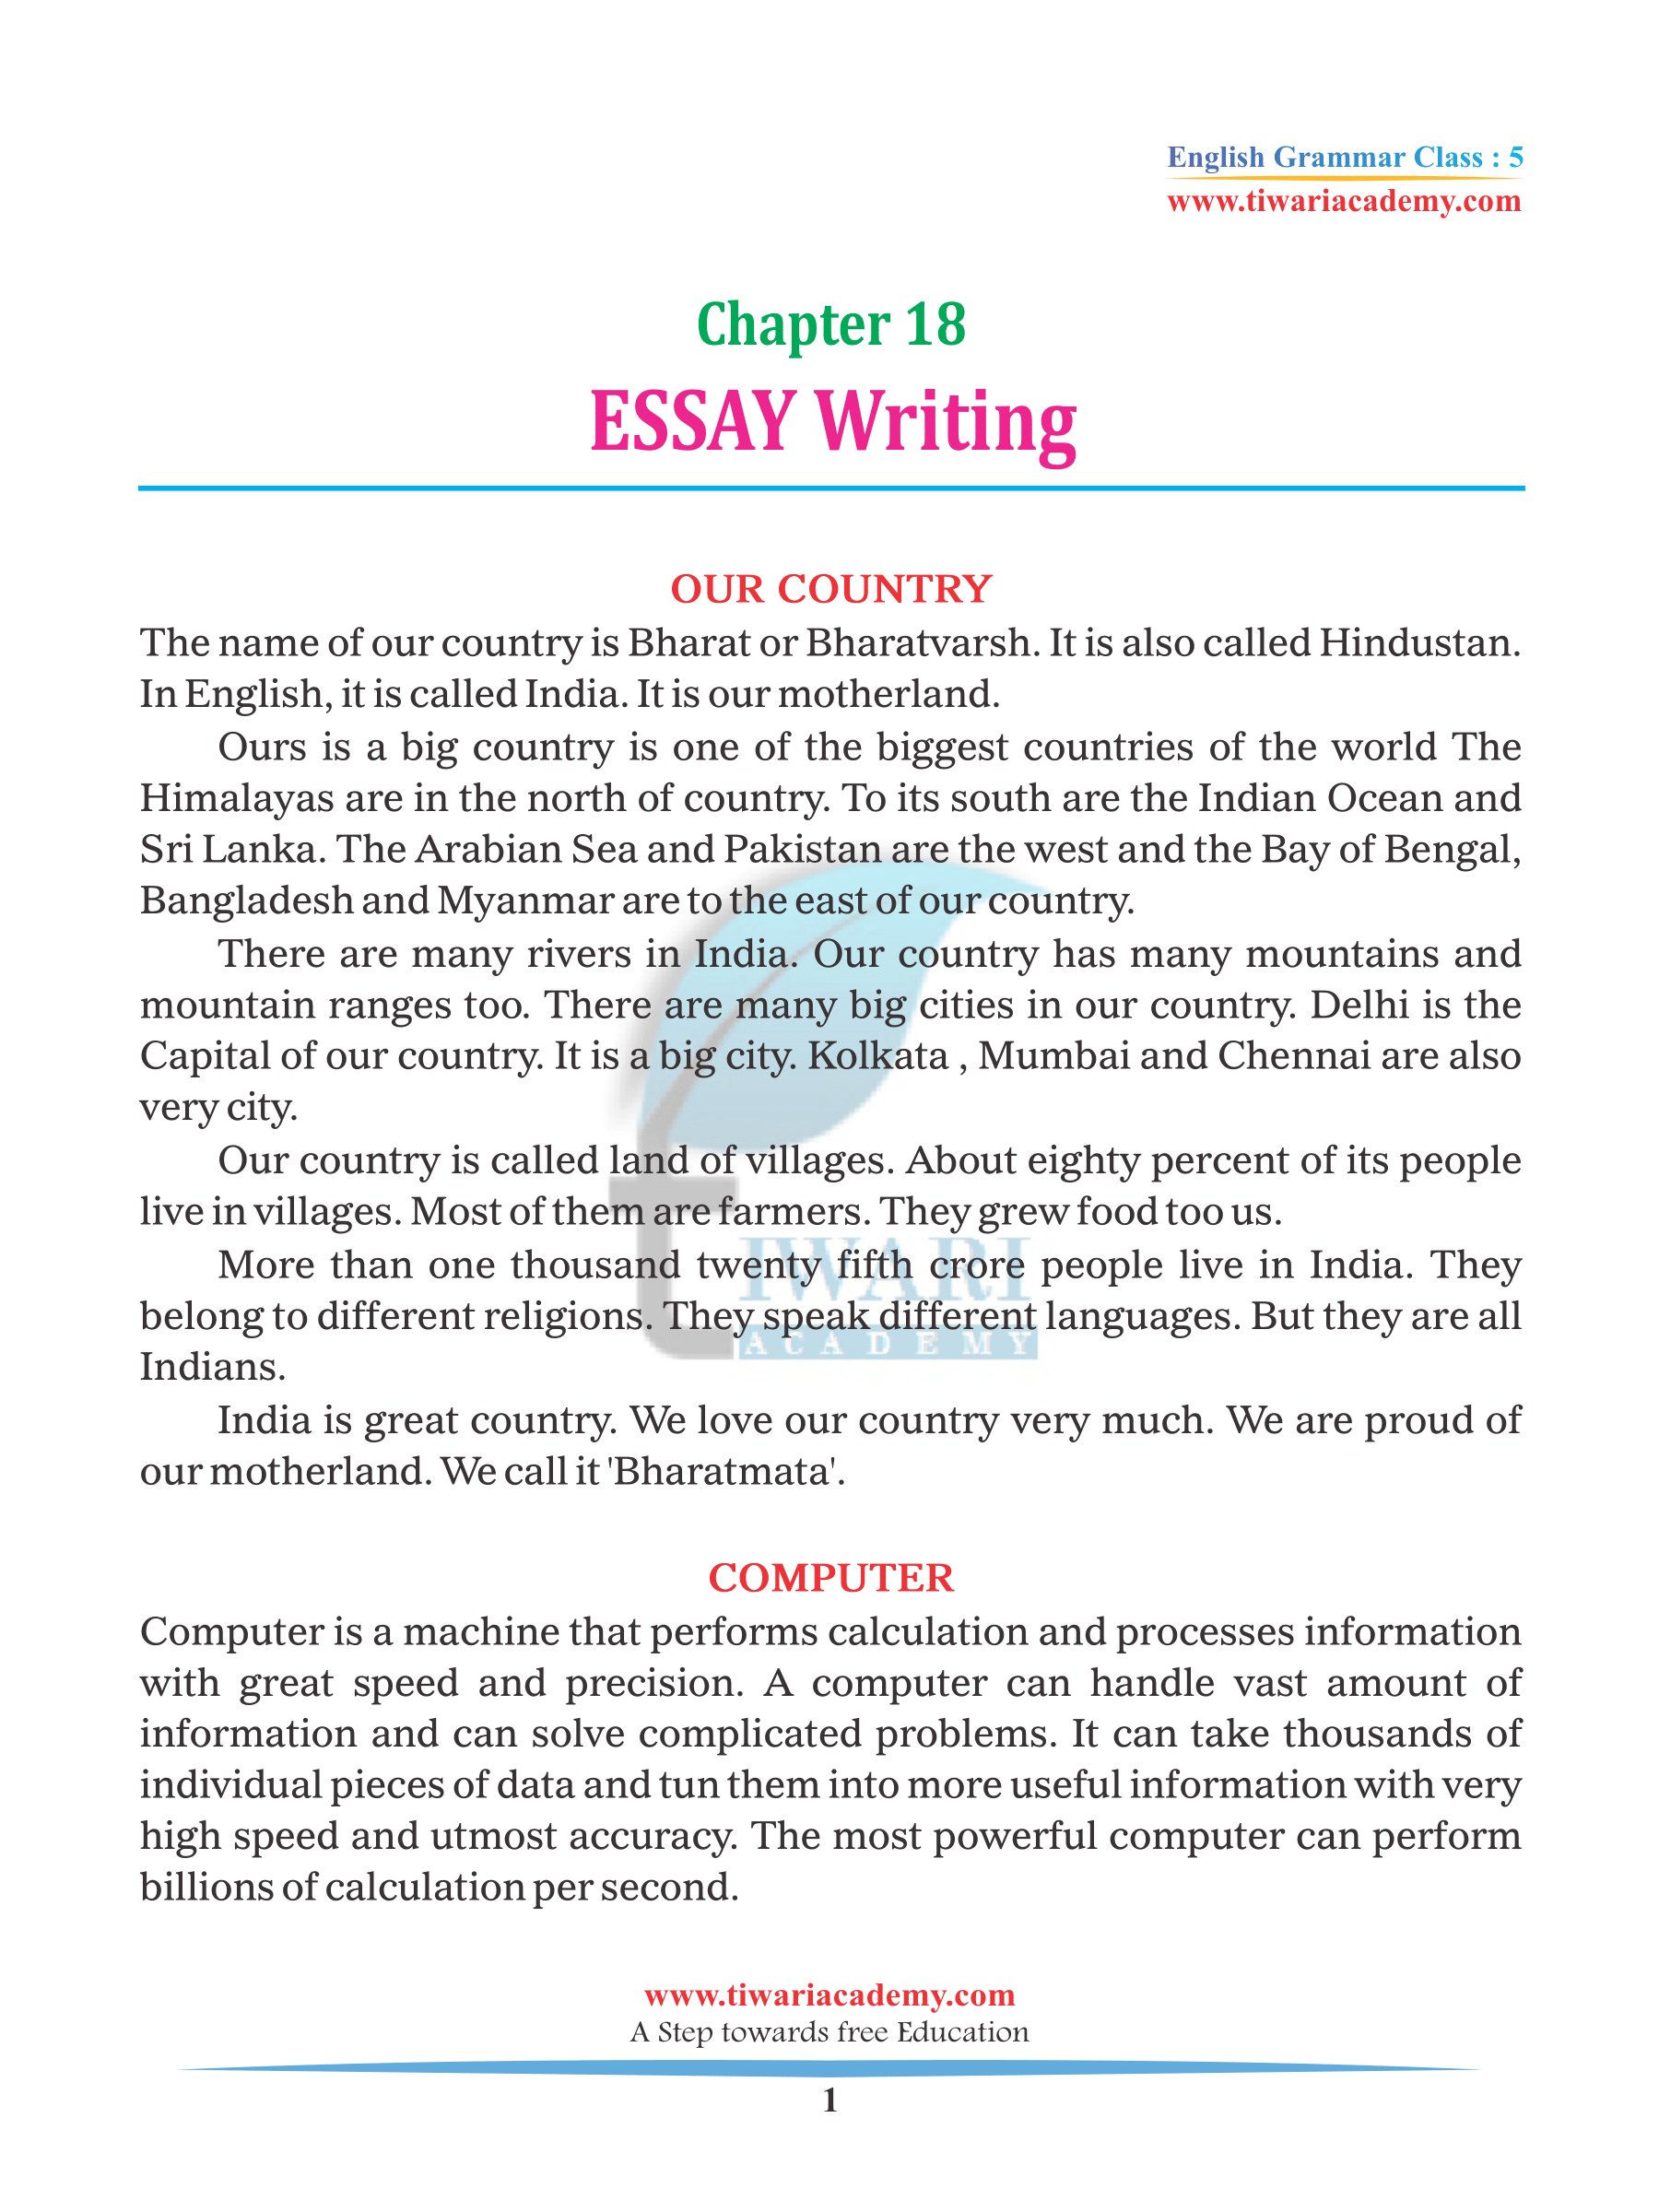 essay topic for class 5th